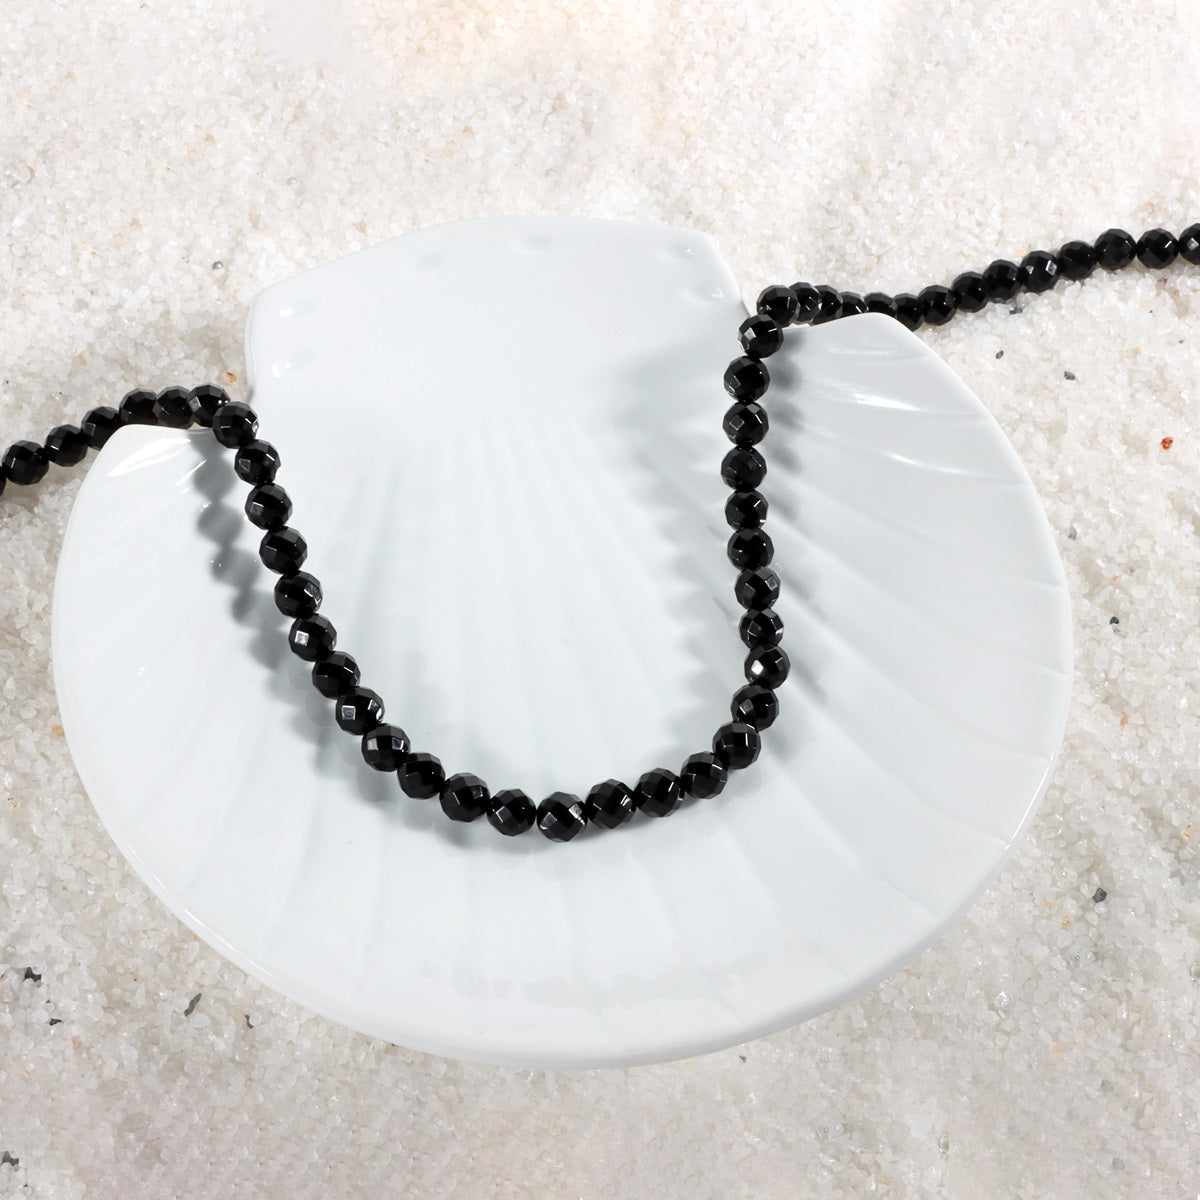 Men's Black Onyx Gemstone Silver Necklace: Casual sophistication for everyday wear